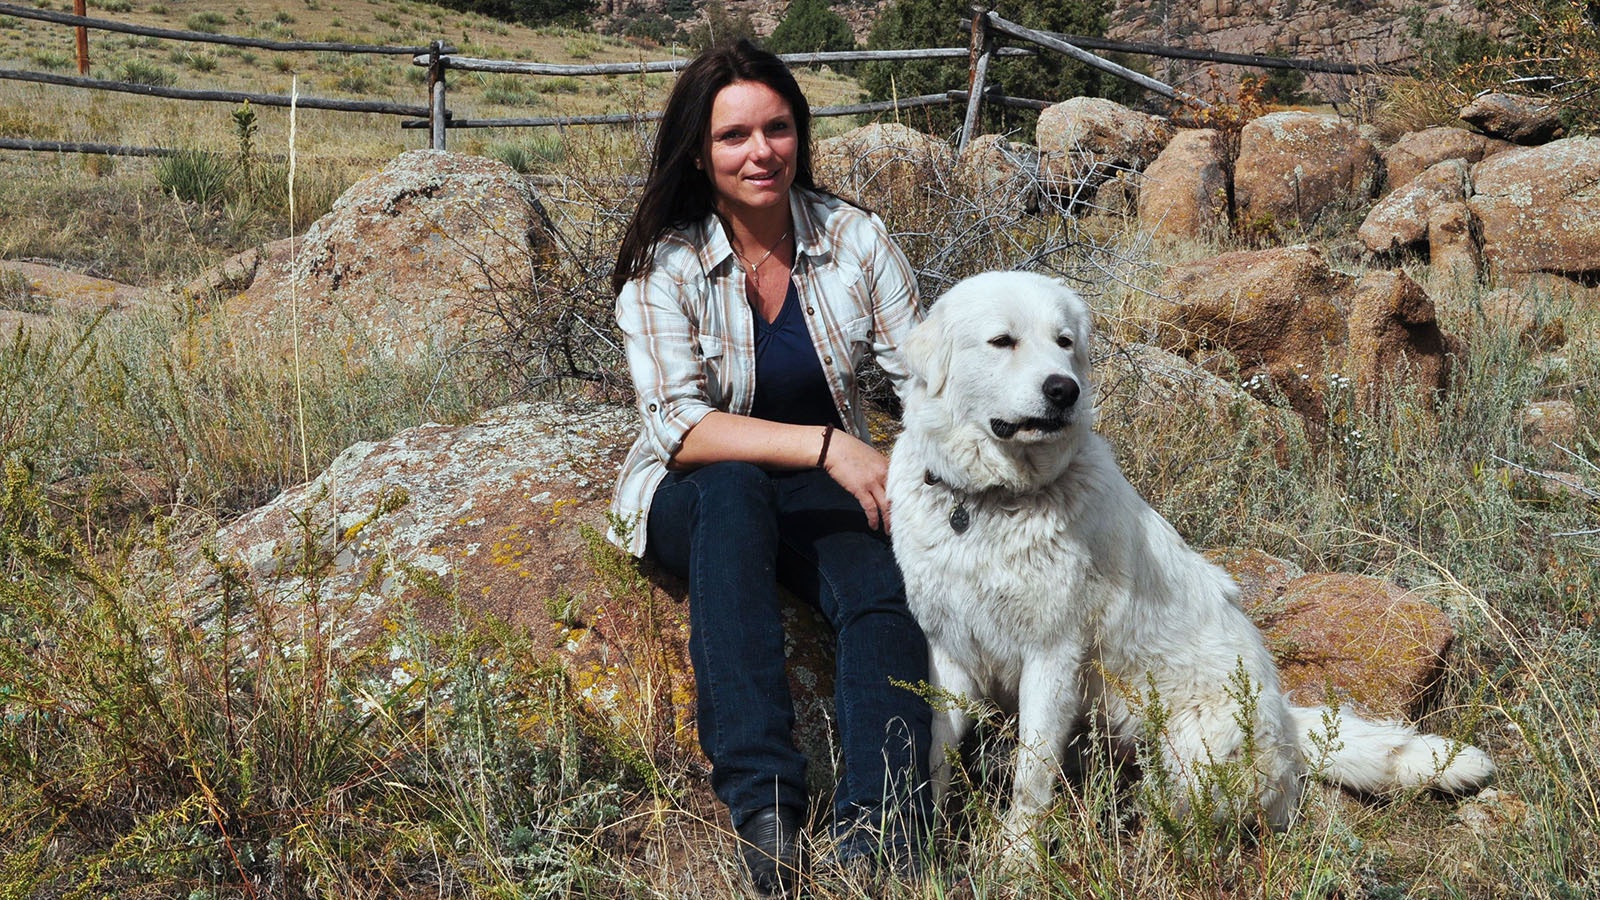 Longtime rancher Krisztina Gayler has used livestock guardian dogs to protect sheep and cattle on two continents.